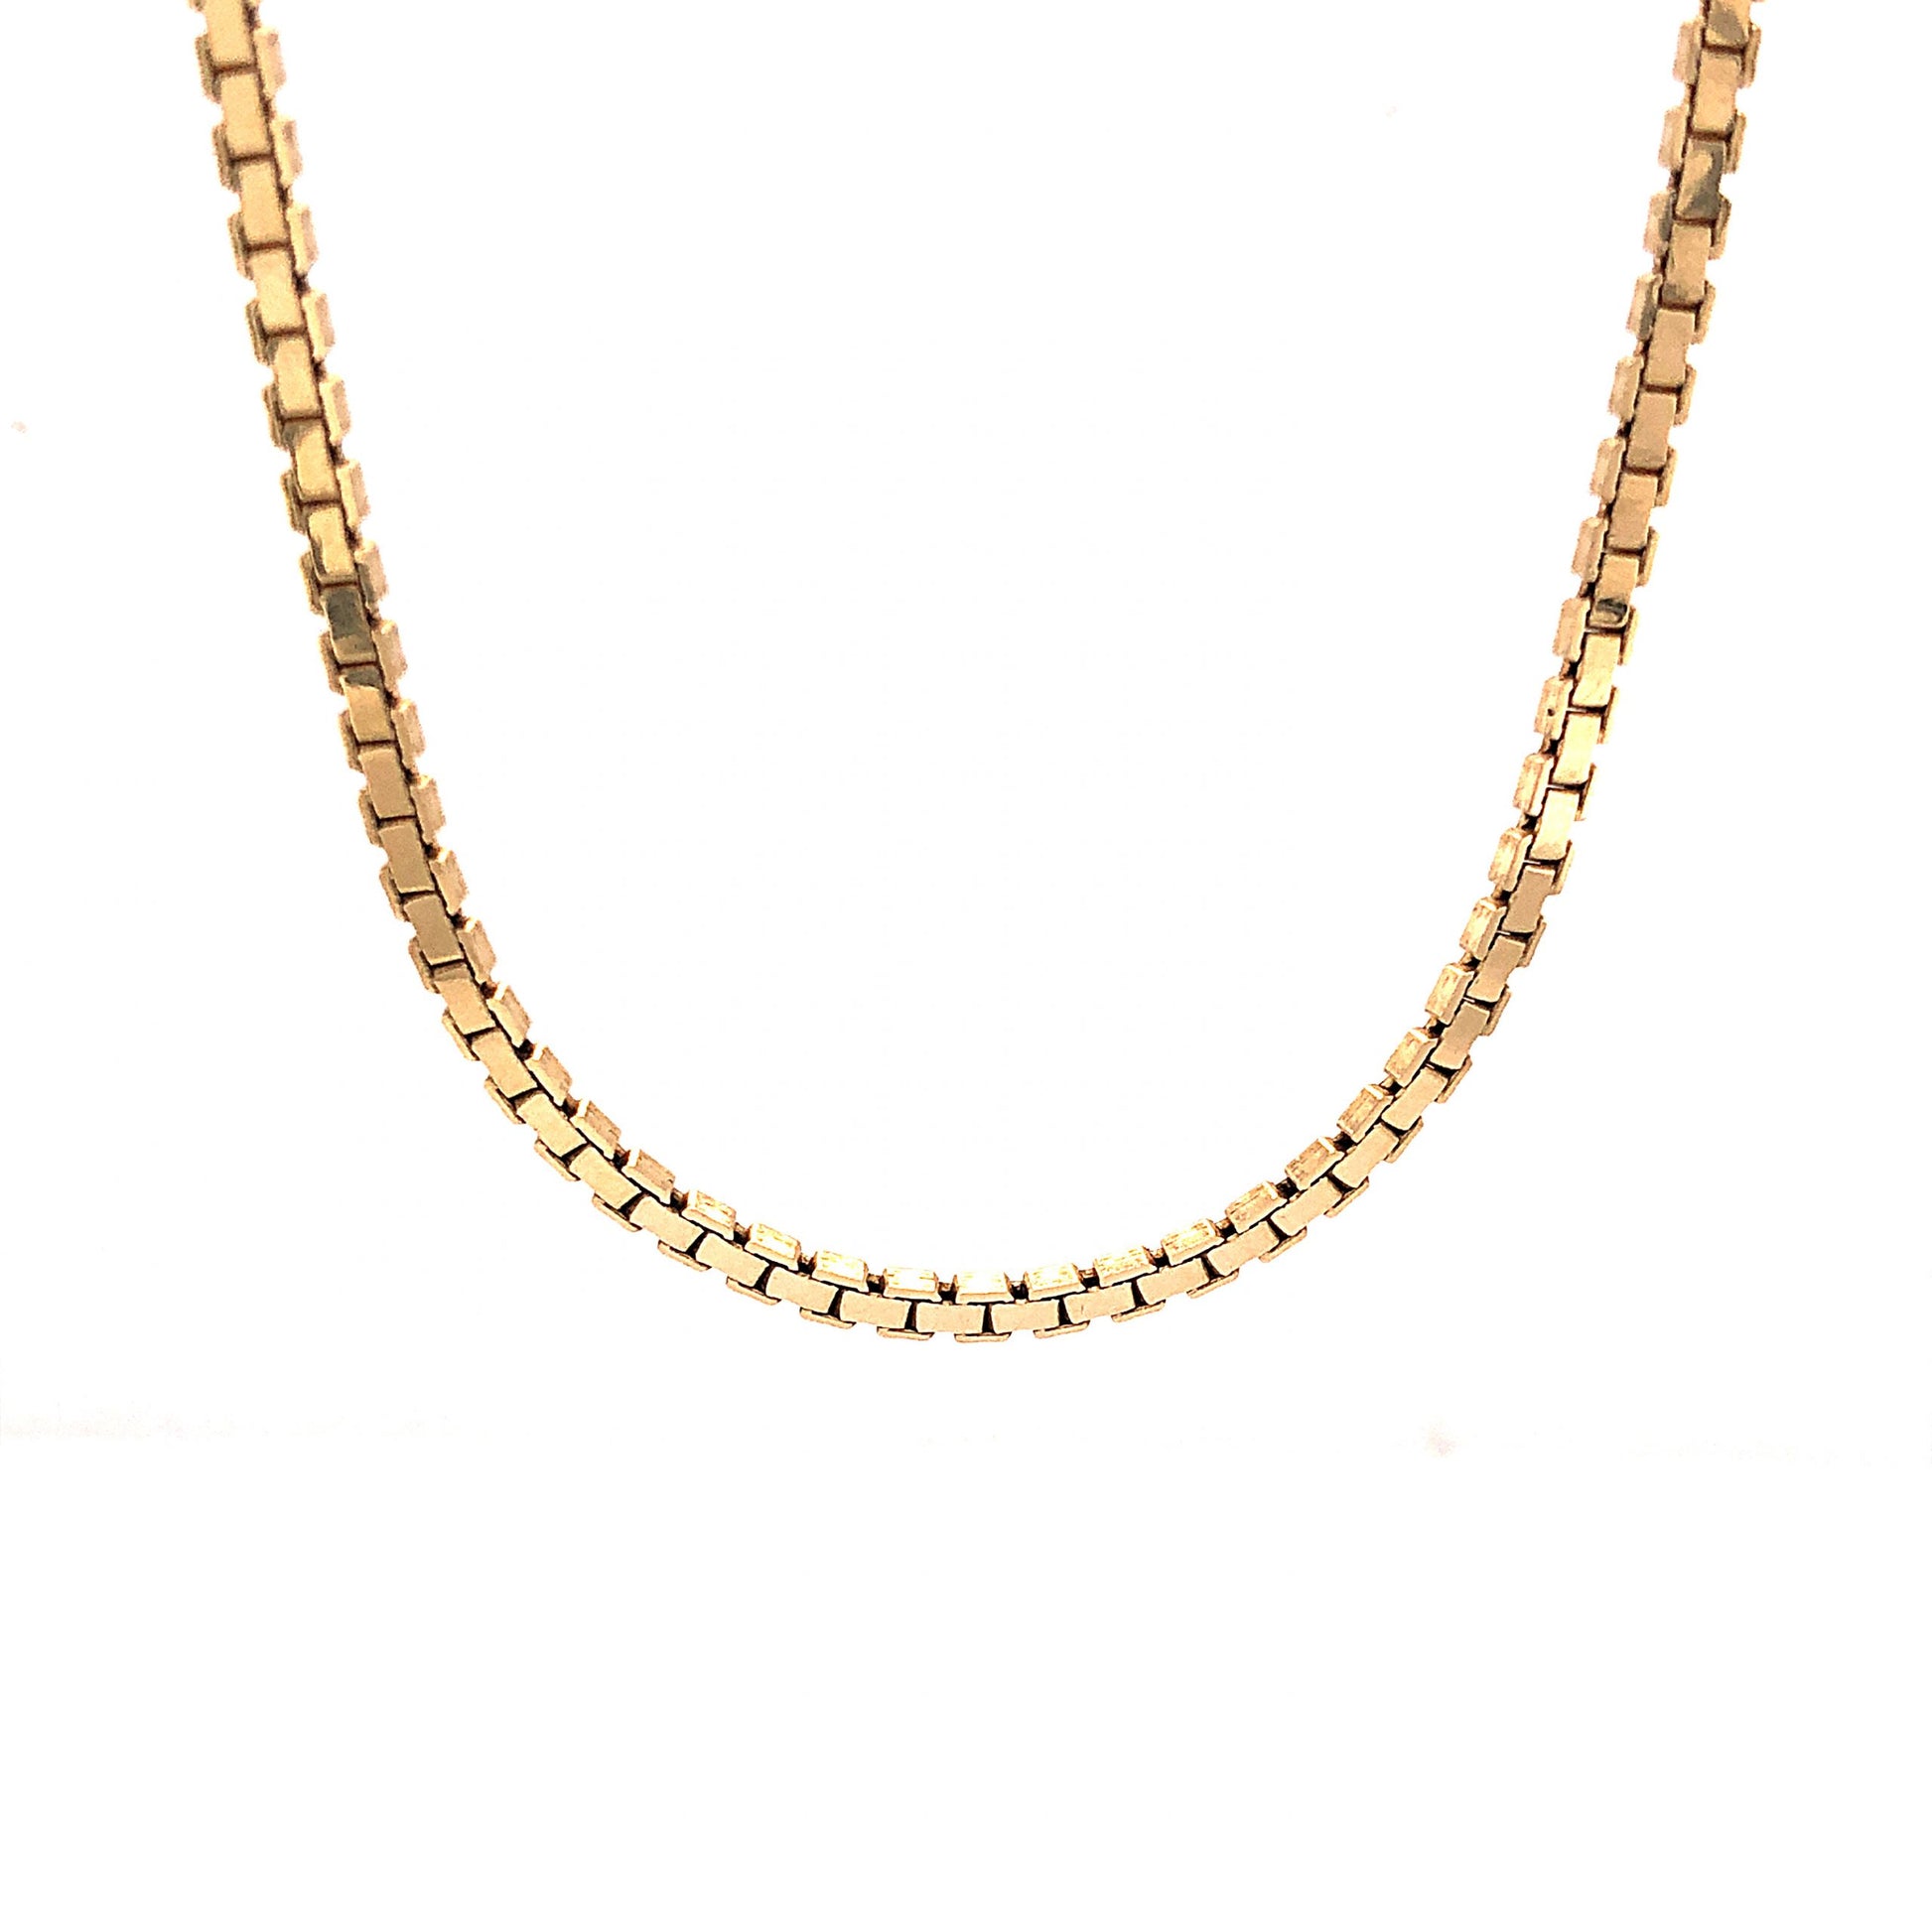 15 Inch Flat Chain Necklace in 14k Yellow GoldComposition: 14 Karat Yellow Gold Total Gram Weight: 14.3 g Inscription: 14K ITALY
      